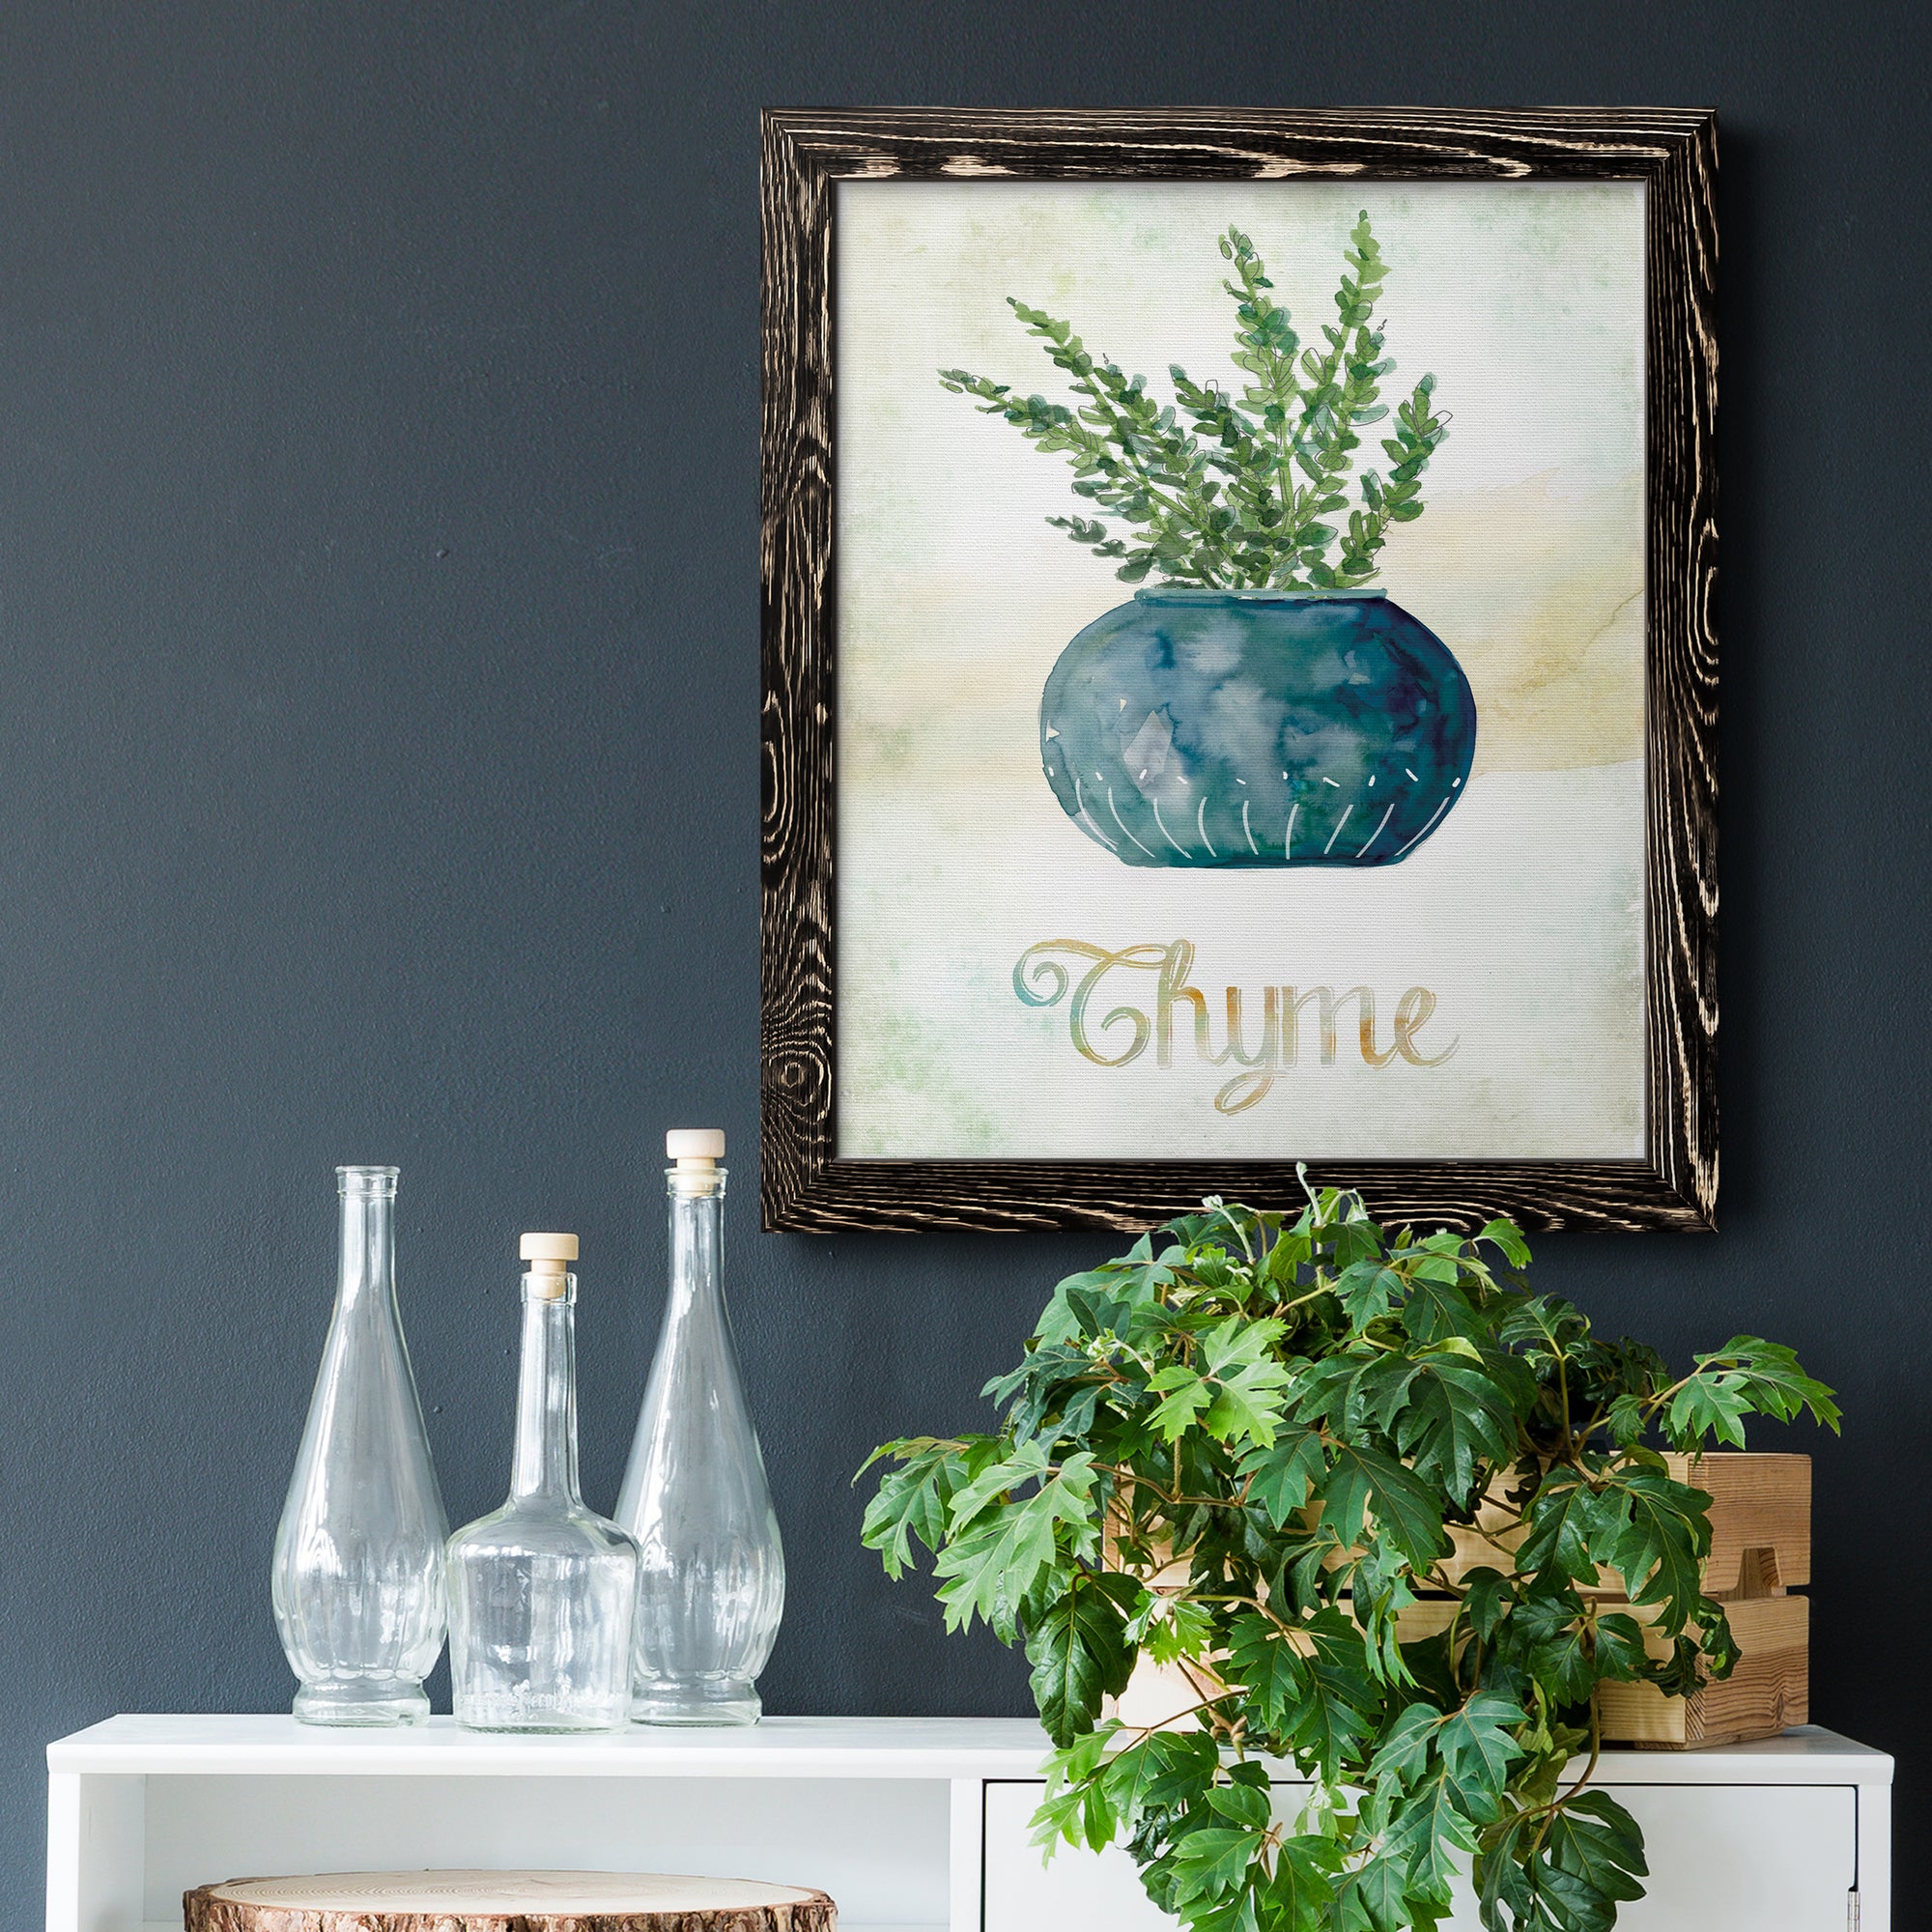 Potted Thyme - Premium Canvas Framed in Barnwood - Ready to Hang